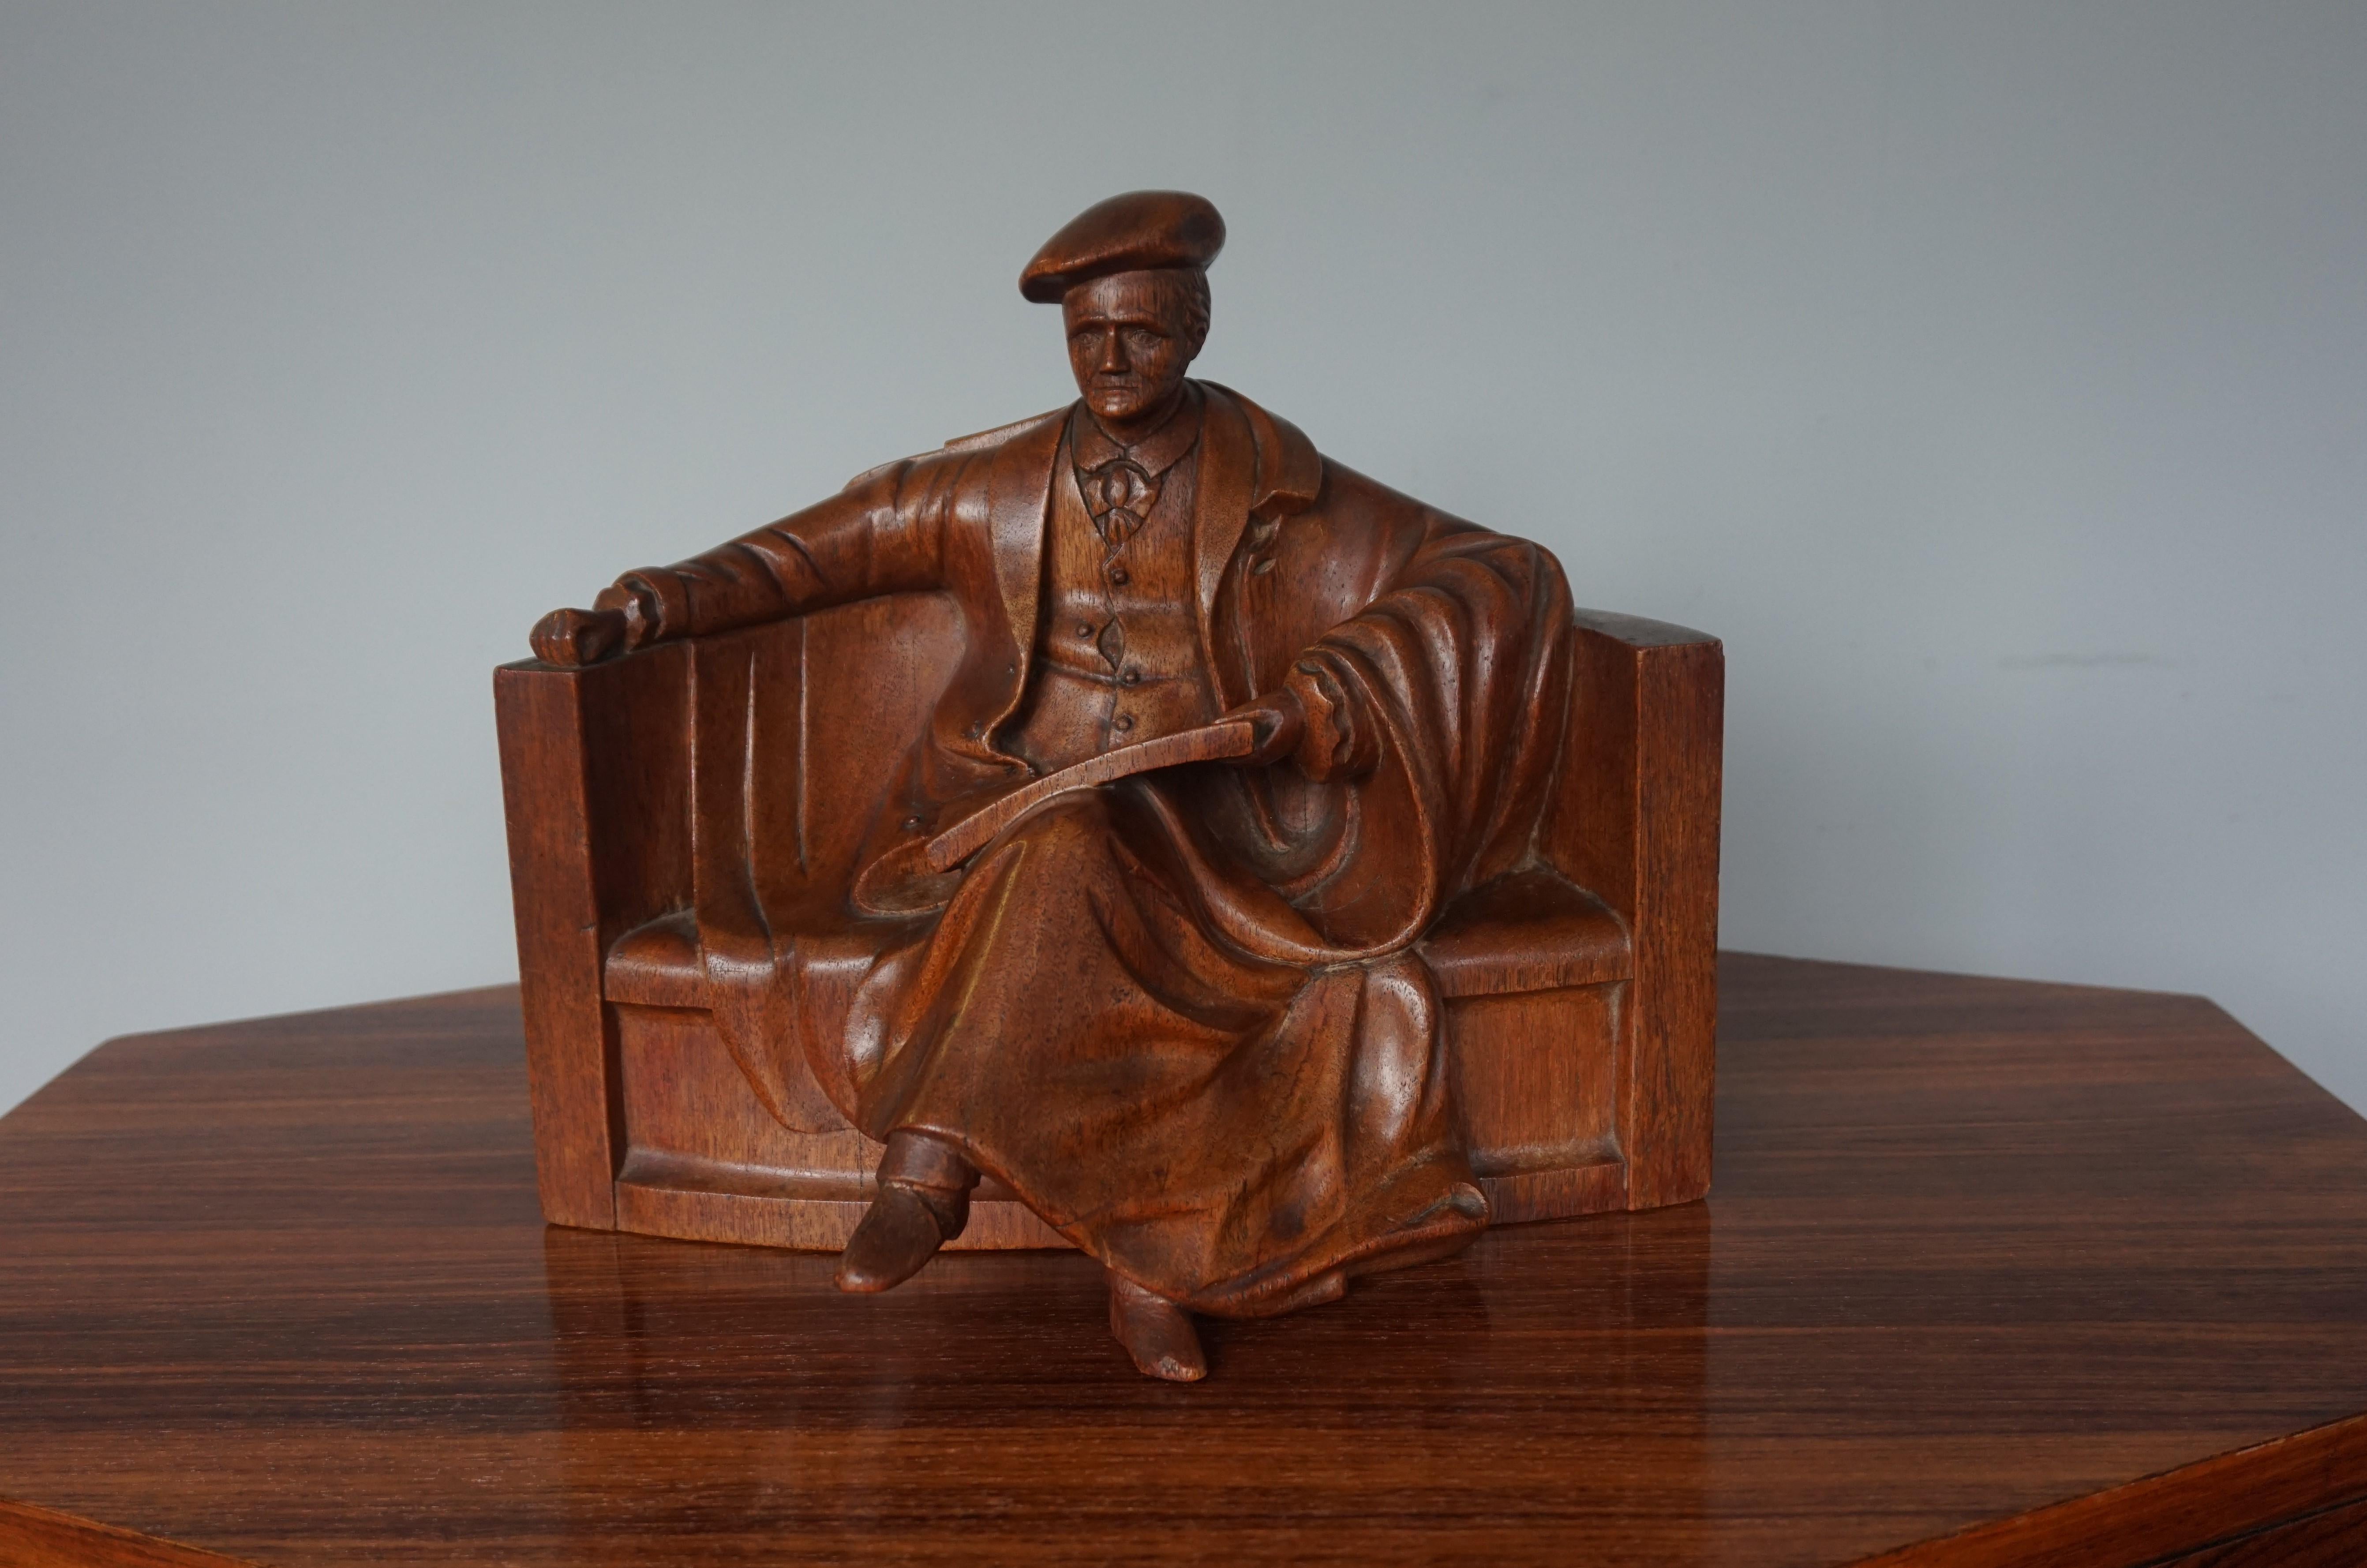 Unique & Stylish Sculpture of a Seated Scholar / Academic Made of Solid Teakwood 6